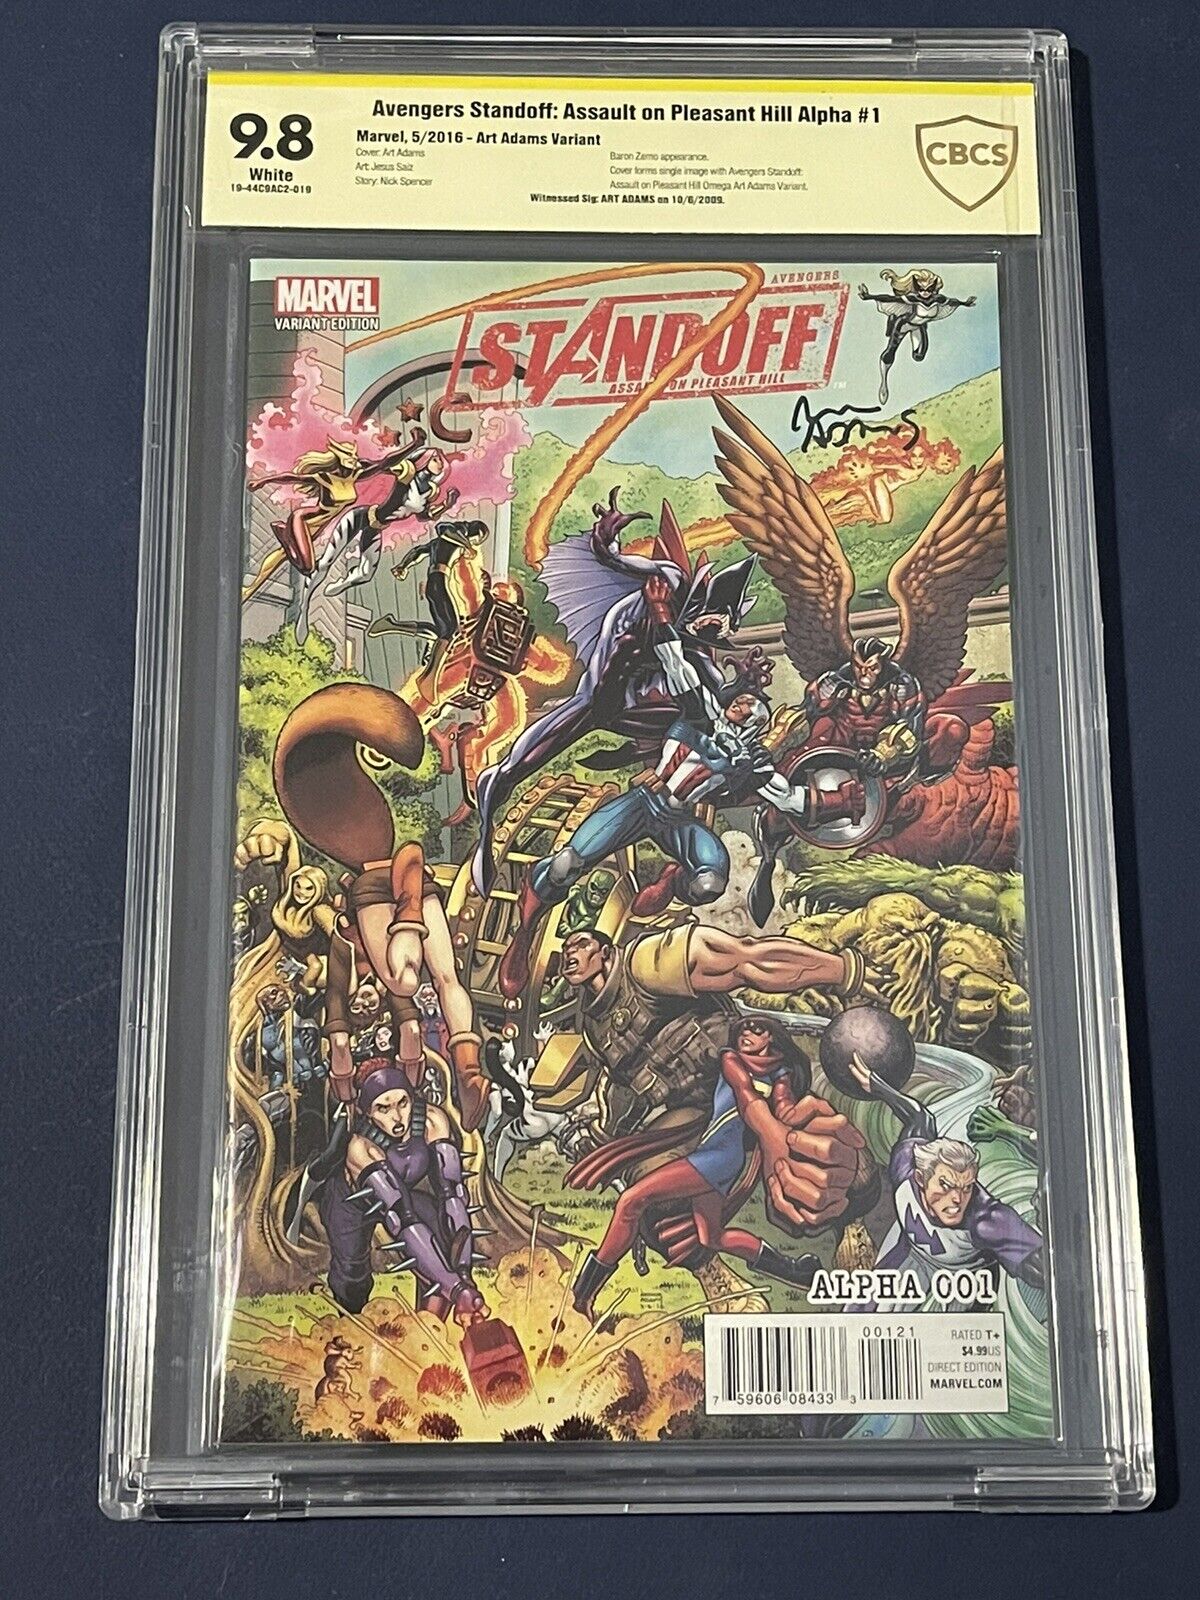 Avengers Standoff: Assault On Pleasant Hill Alpha #1 CBCS 9.8 Signed By Adams